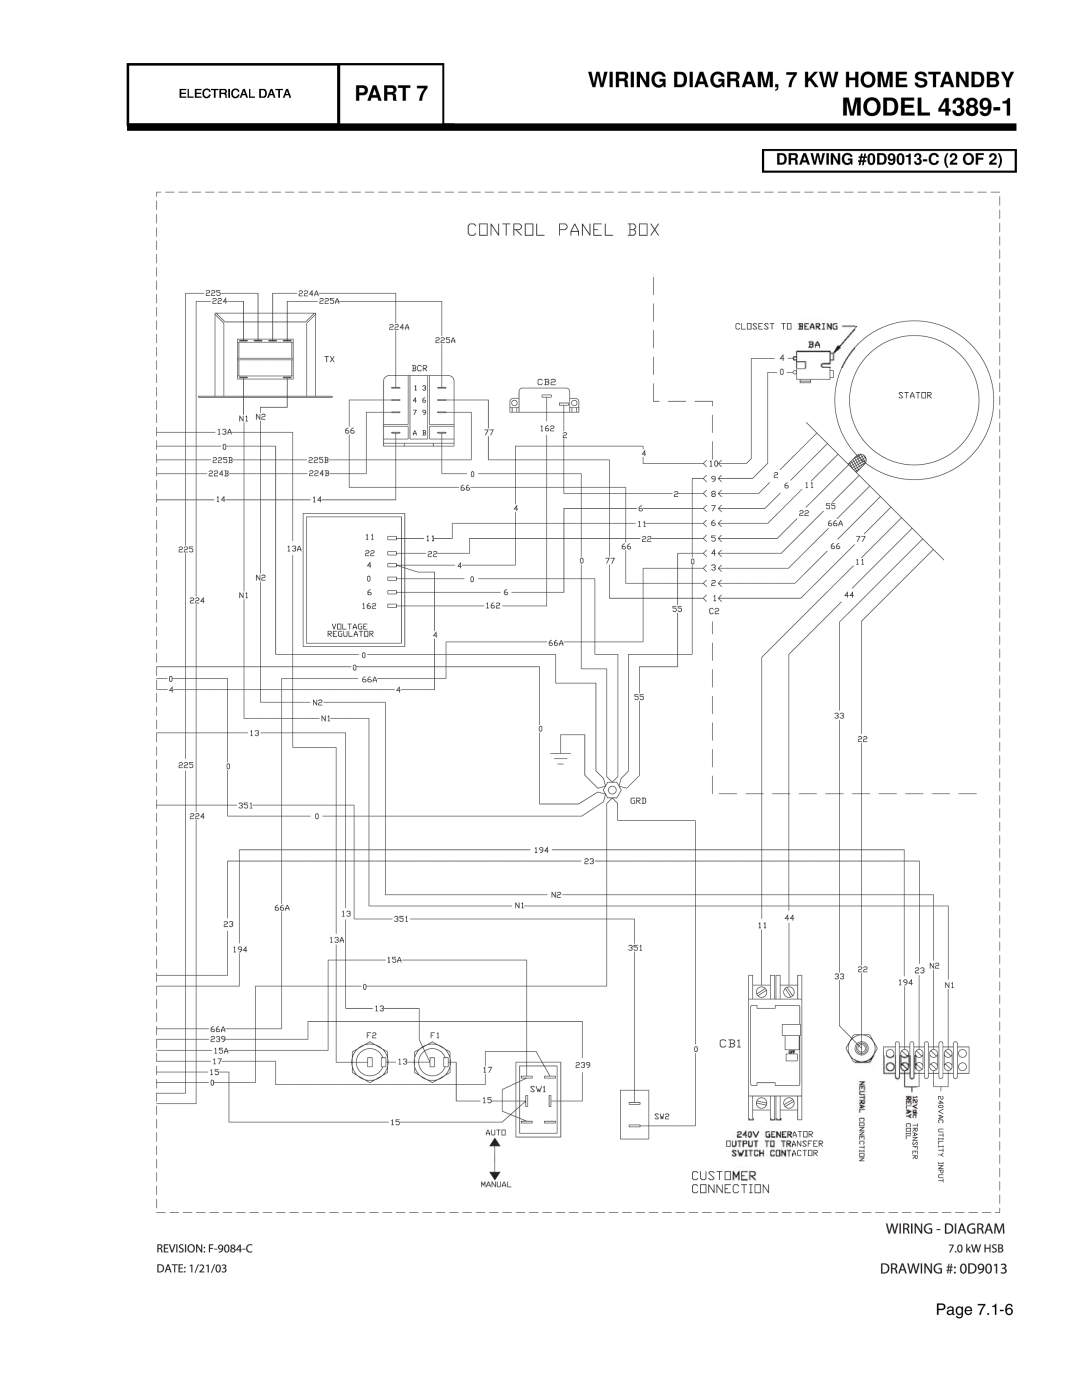 Guardian Technologies 4759, 4456 Model, Part, WIRING DIAGRAM, 7 KW HOME STANDBY, DRAWING #0D9013-C 2 OF, Electrical Data 